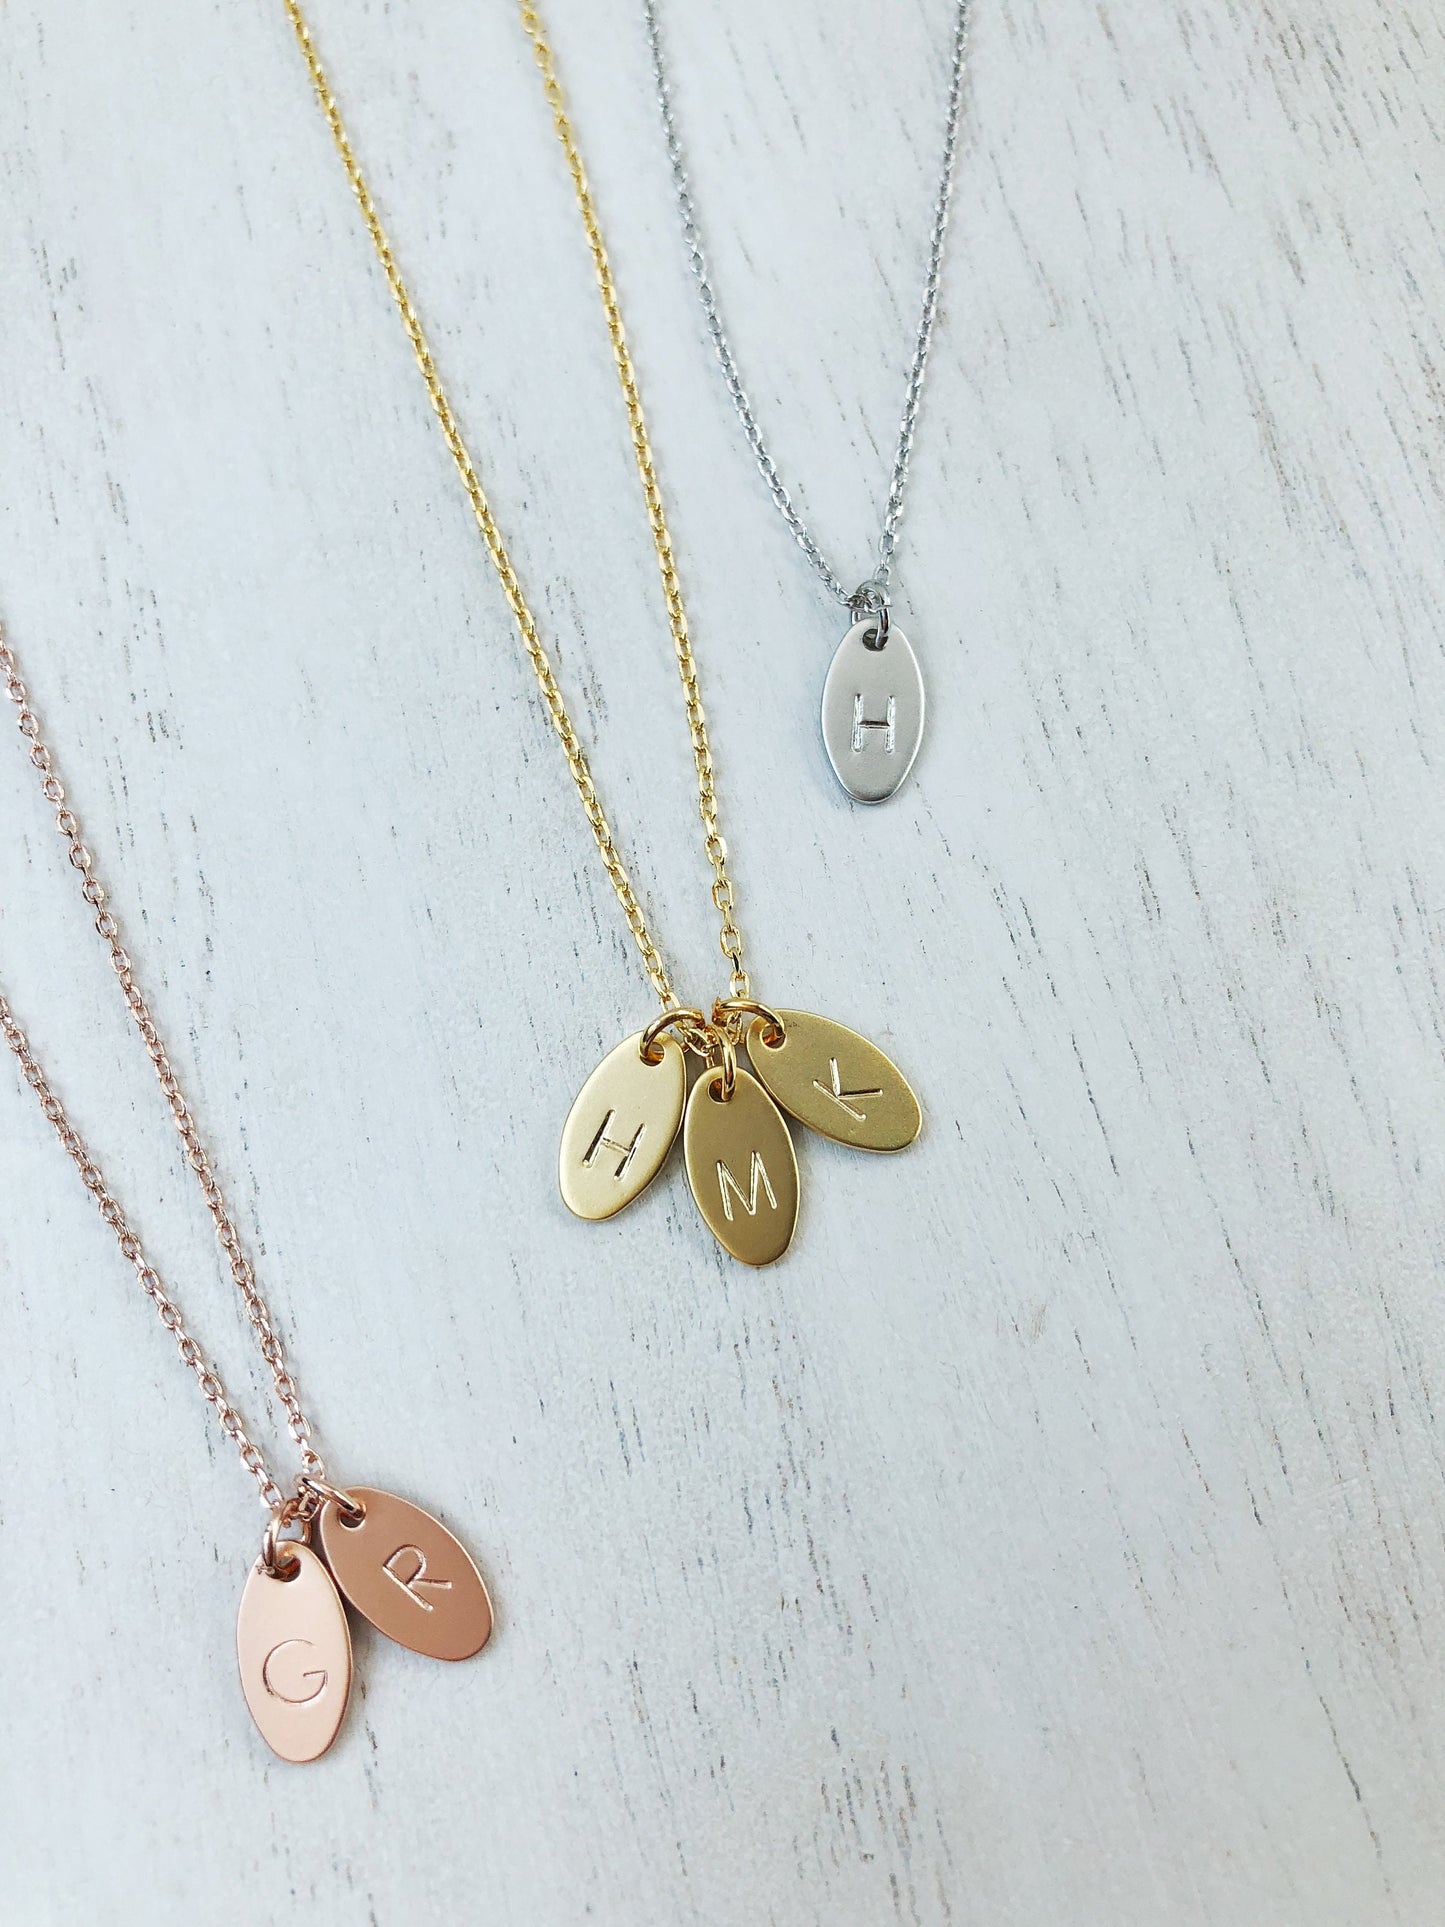 personalized necklace, initial necklace, silver necklace, gold necklace, gift for mom, birthday gifts, new mom gift